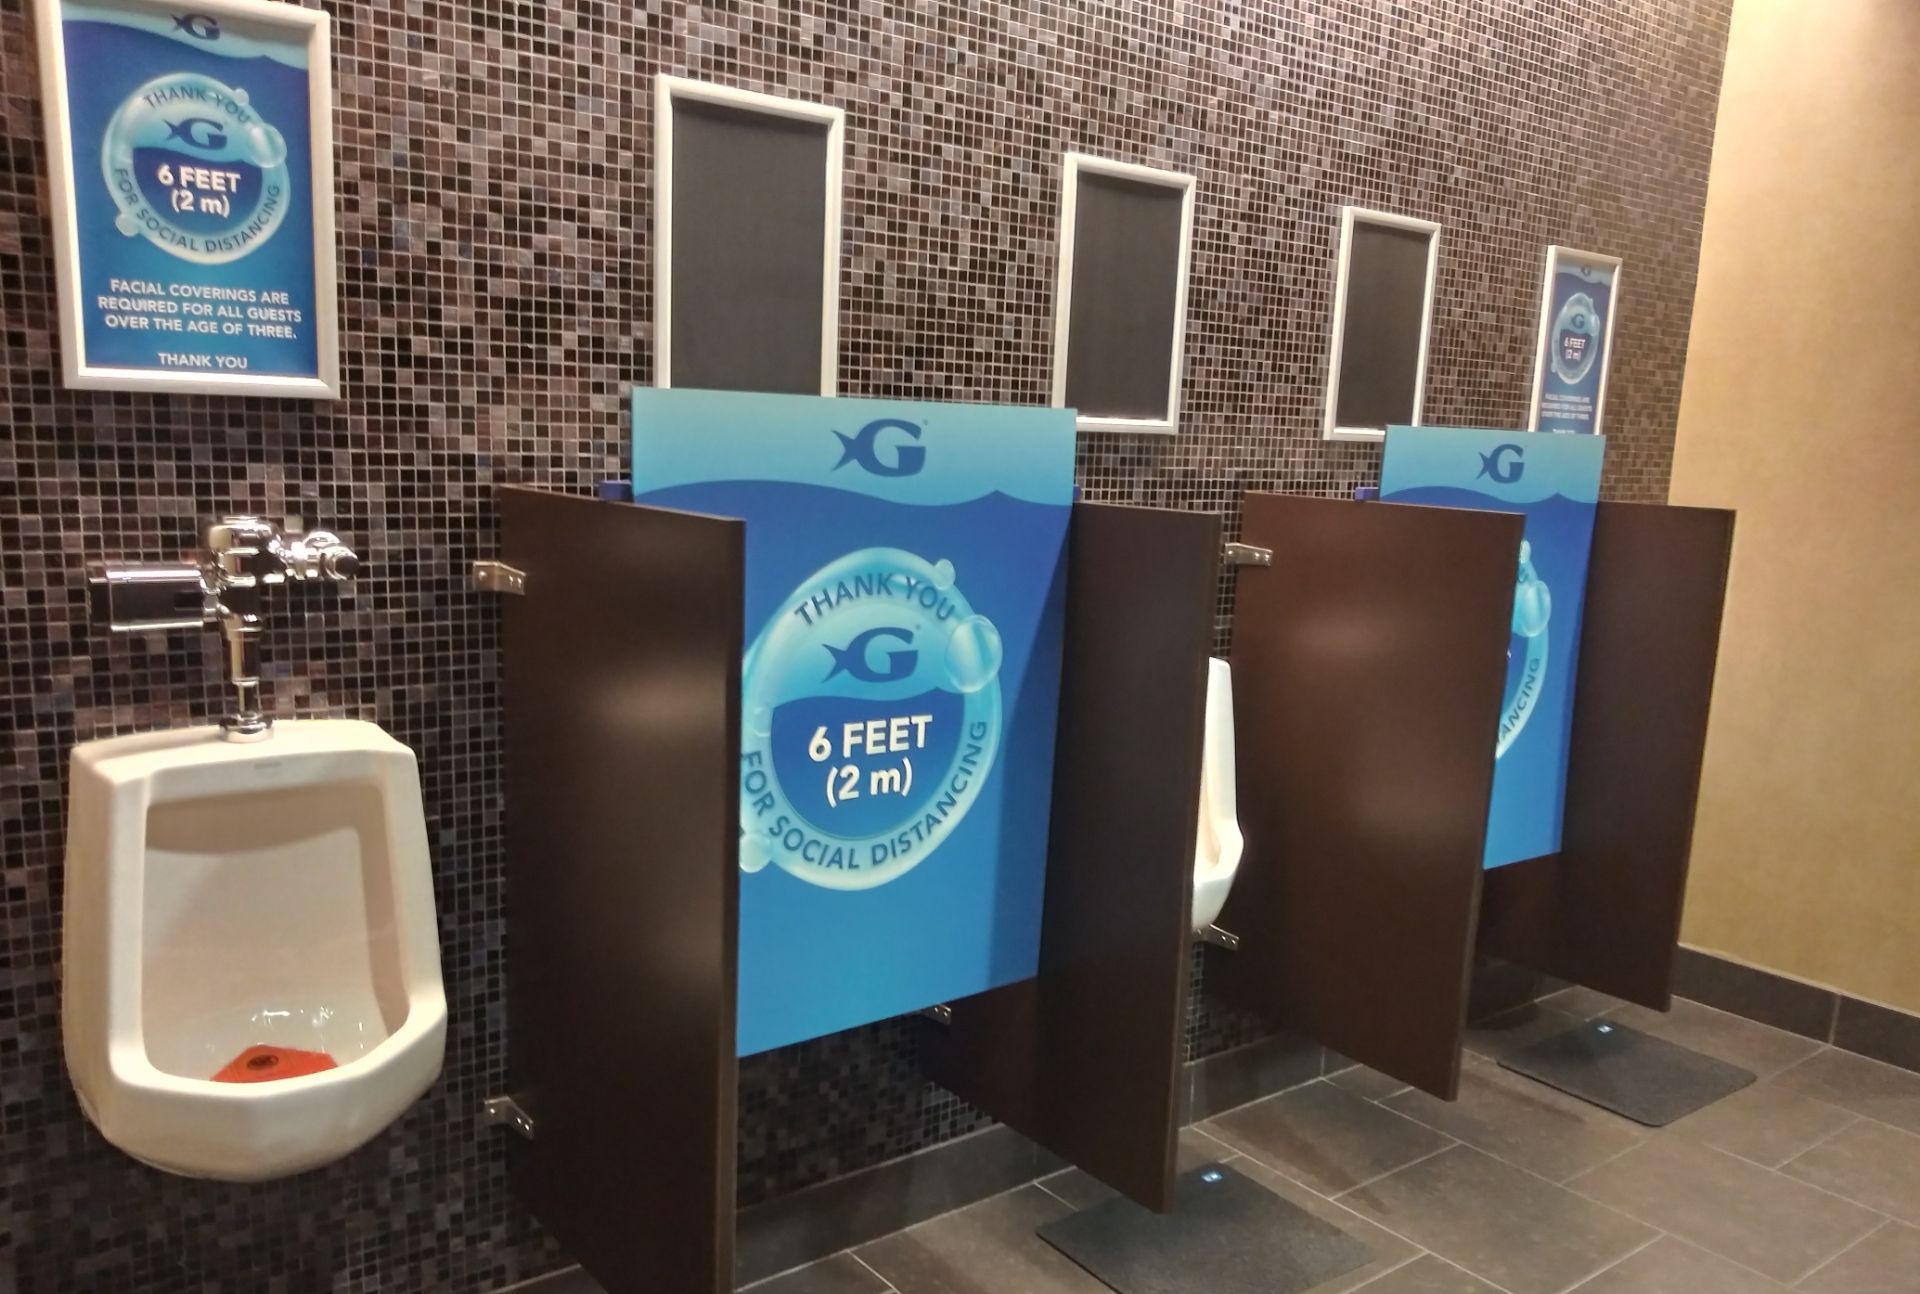 Finally, the sacred urinal rule is being enforced